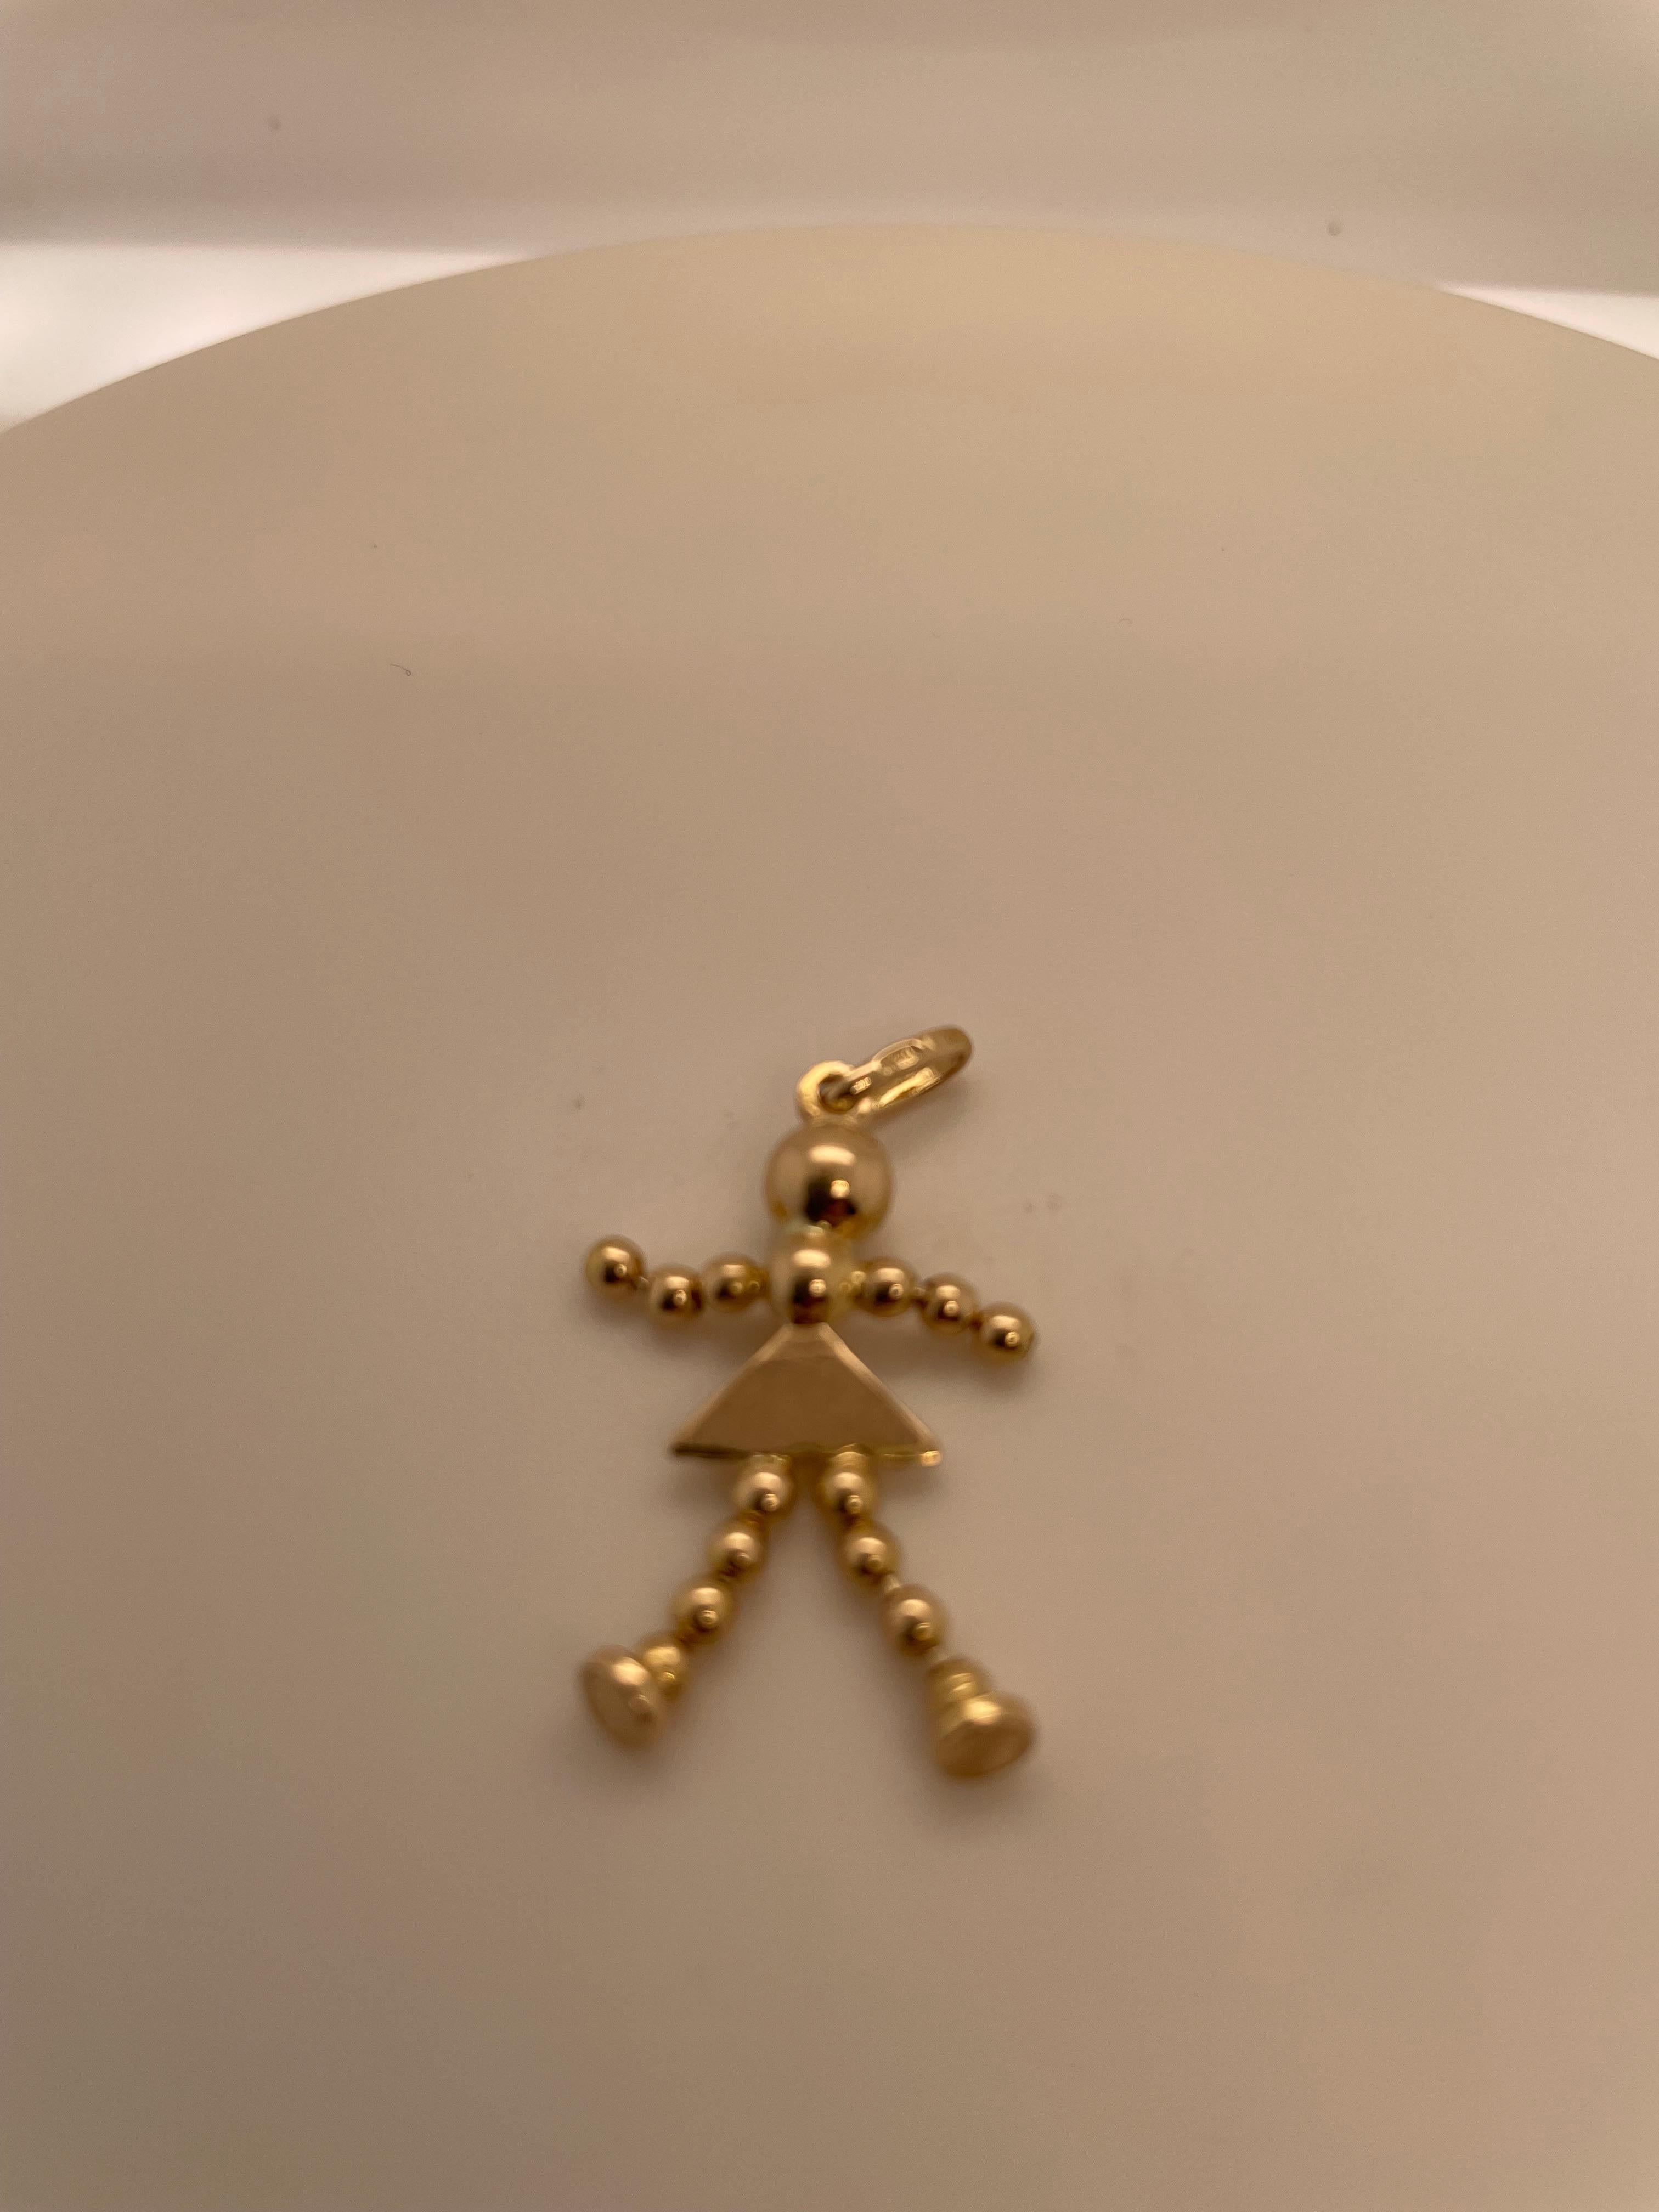 Adorable charm:  a little girl charm, with beaded arms and legs that move.  14K yellow gold.  1 1/4